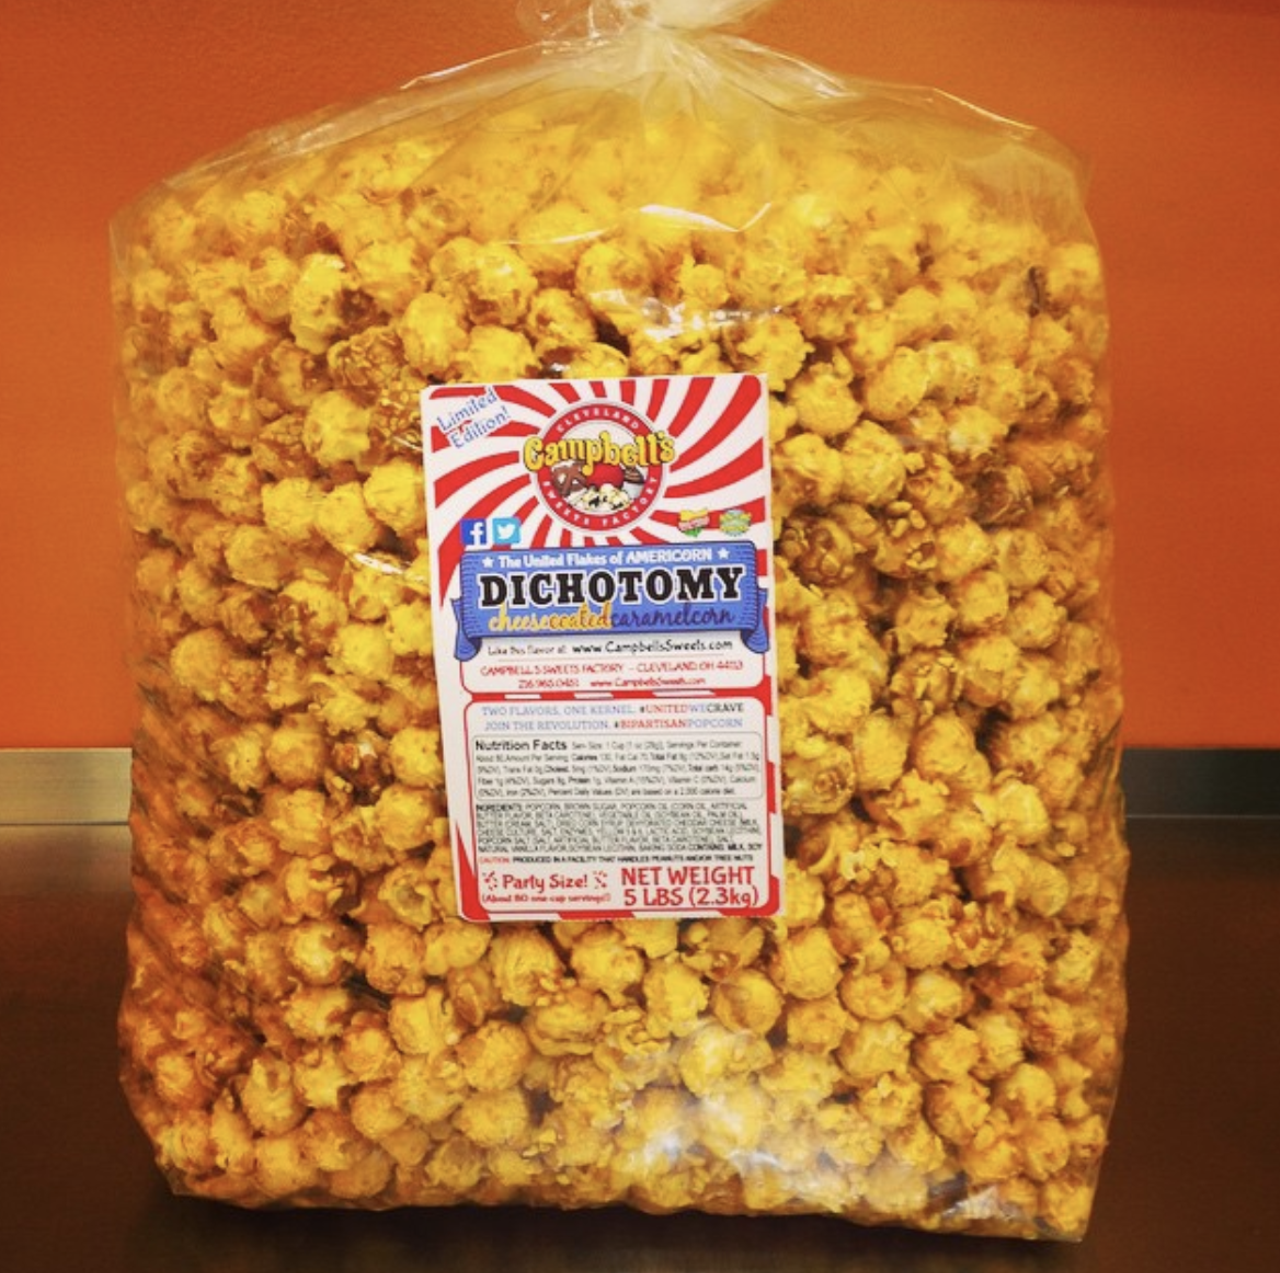 Campbell's Sweets Factory Popcorn Balls
Campbell's Sweets Factory sells a 9-pack of its epic Caramel Popcorn Balls, made the old-fashioned way in giant copper vats. Nobody would know if you arrived only with eight.